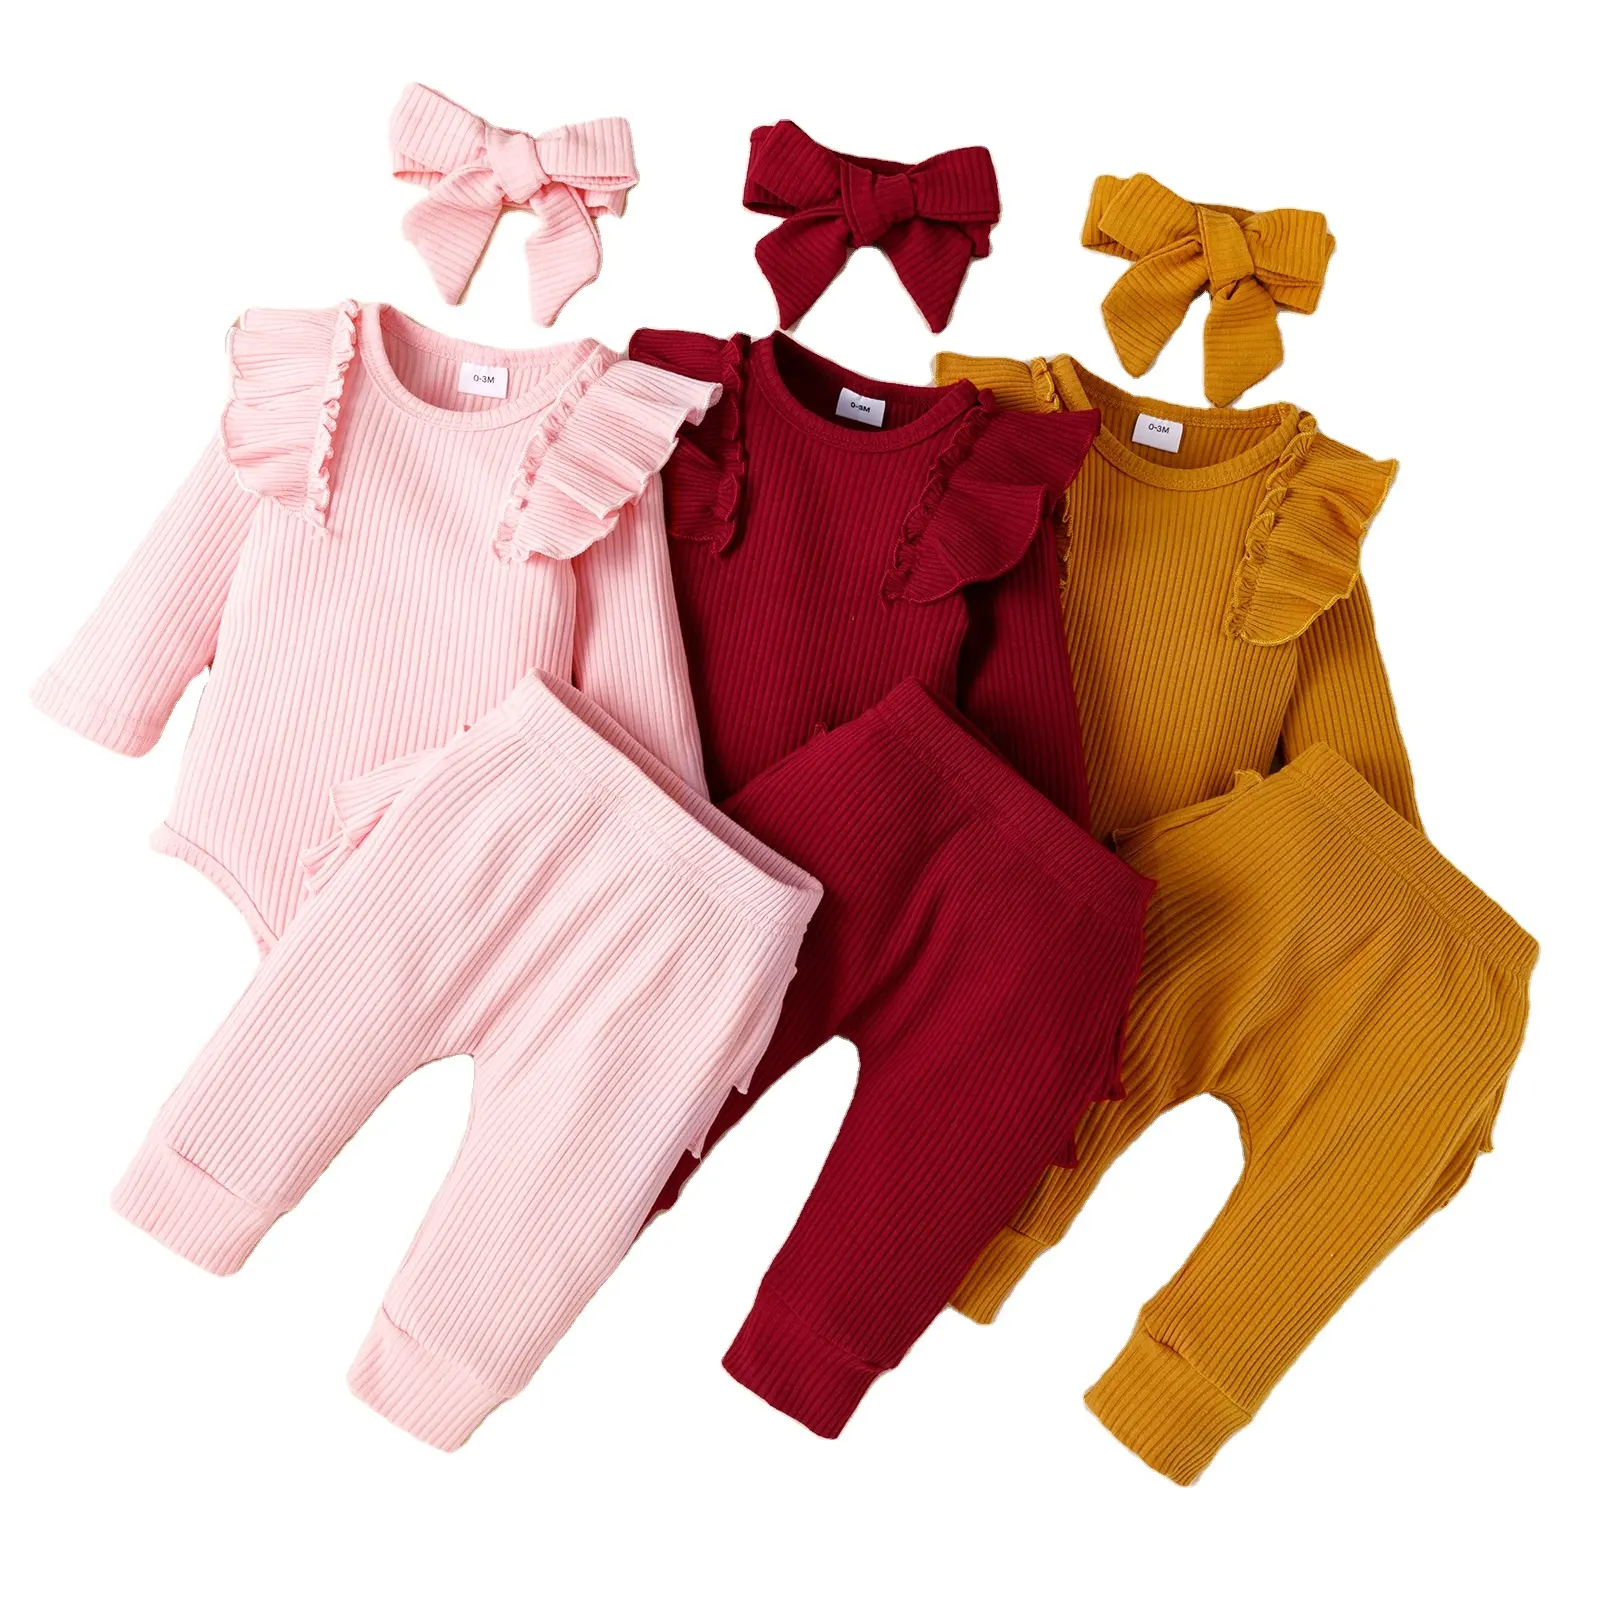 Fall Winter Ribbed Baby Clothes Sleep suits Ruffle Newborn Girls Rompers jumpsuit